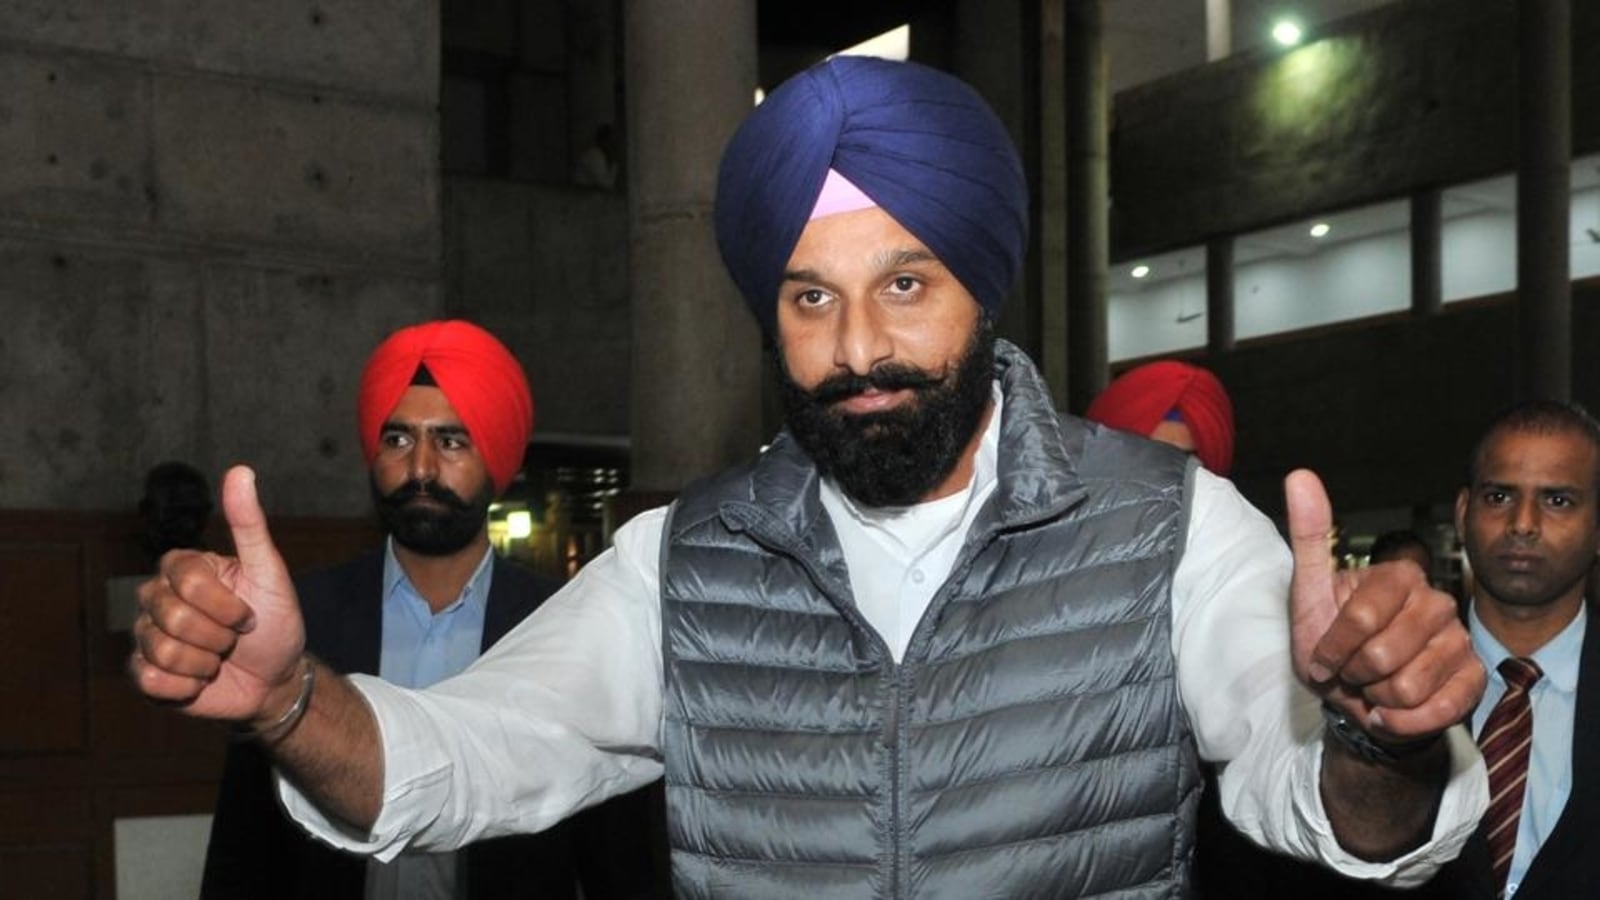 Lookout notice against Akali leader Majithia, not allowed to leave India | Latest News India - Hindustan Times